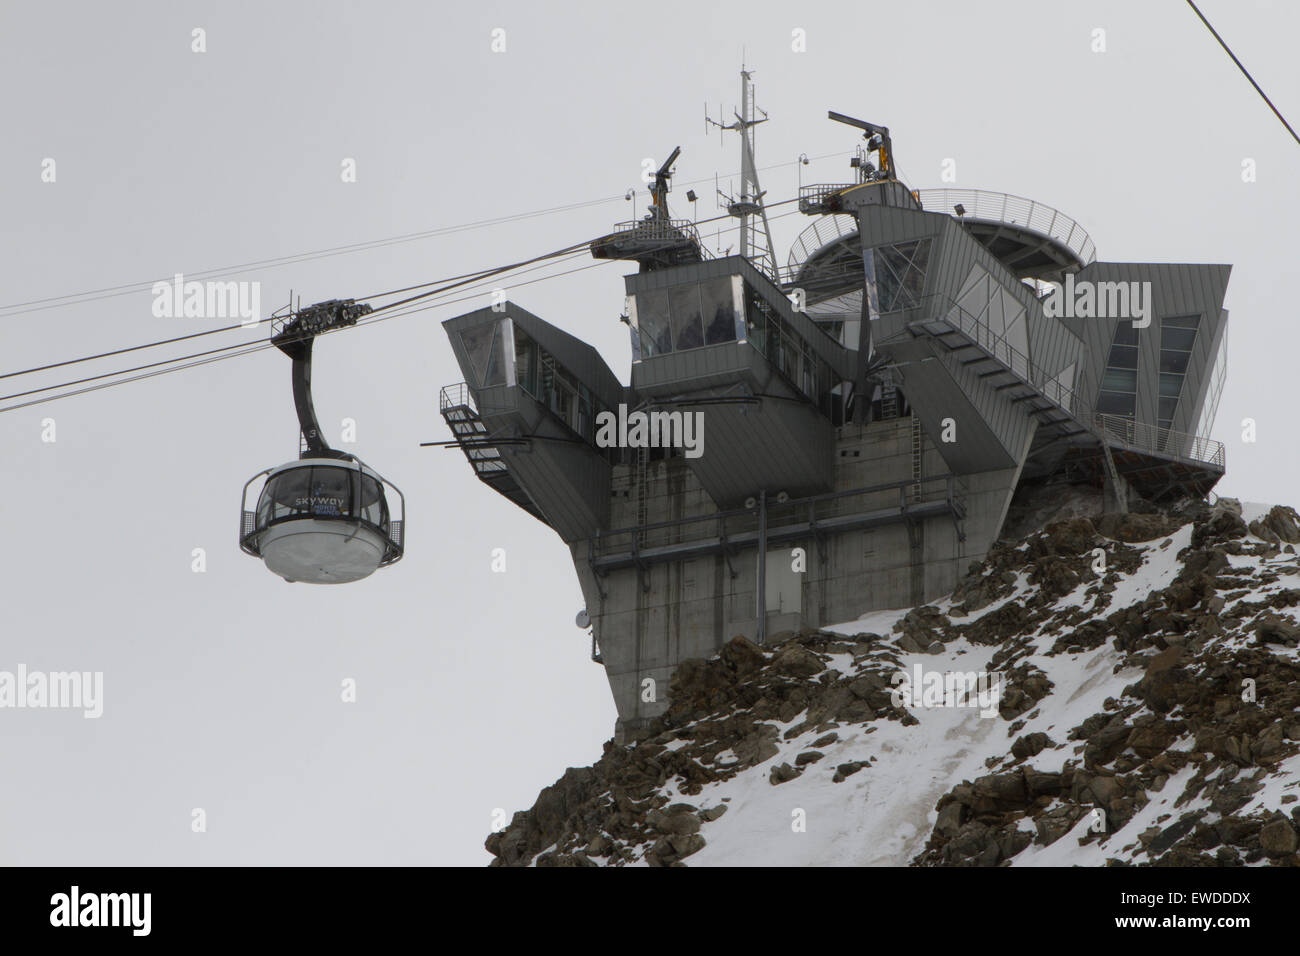 Courmayeur, Italy, 23rd June 2015. A gondola of the Skyway cable car arrives at Pointe Helbronner station. The Skyway cable car connects Courmayeur to Pointe Helbronner (3,466 m) in the Mont Blanc massif. Stock Photo